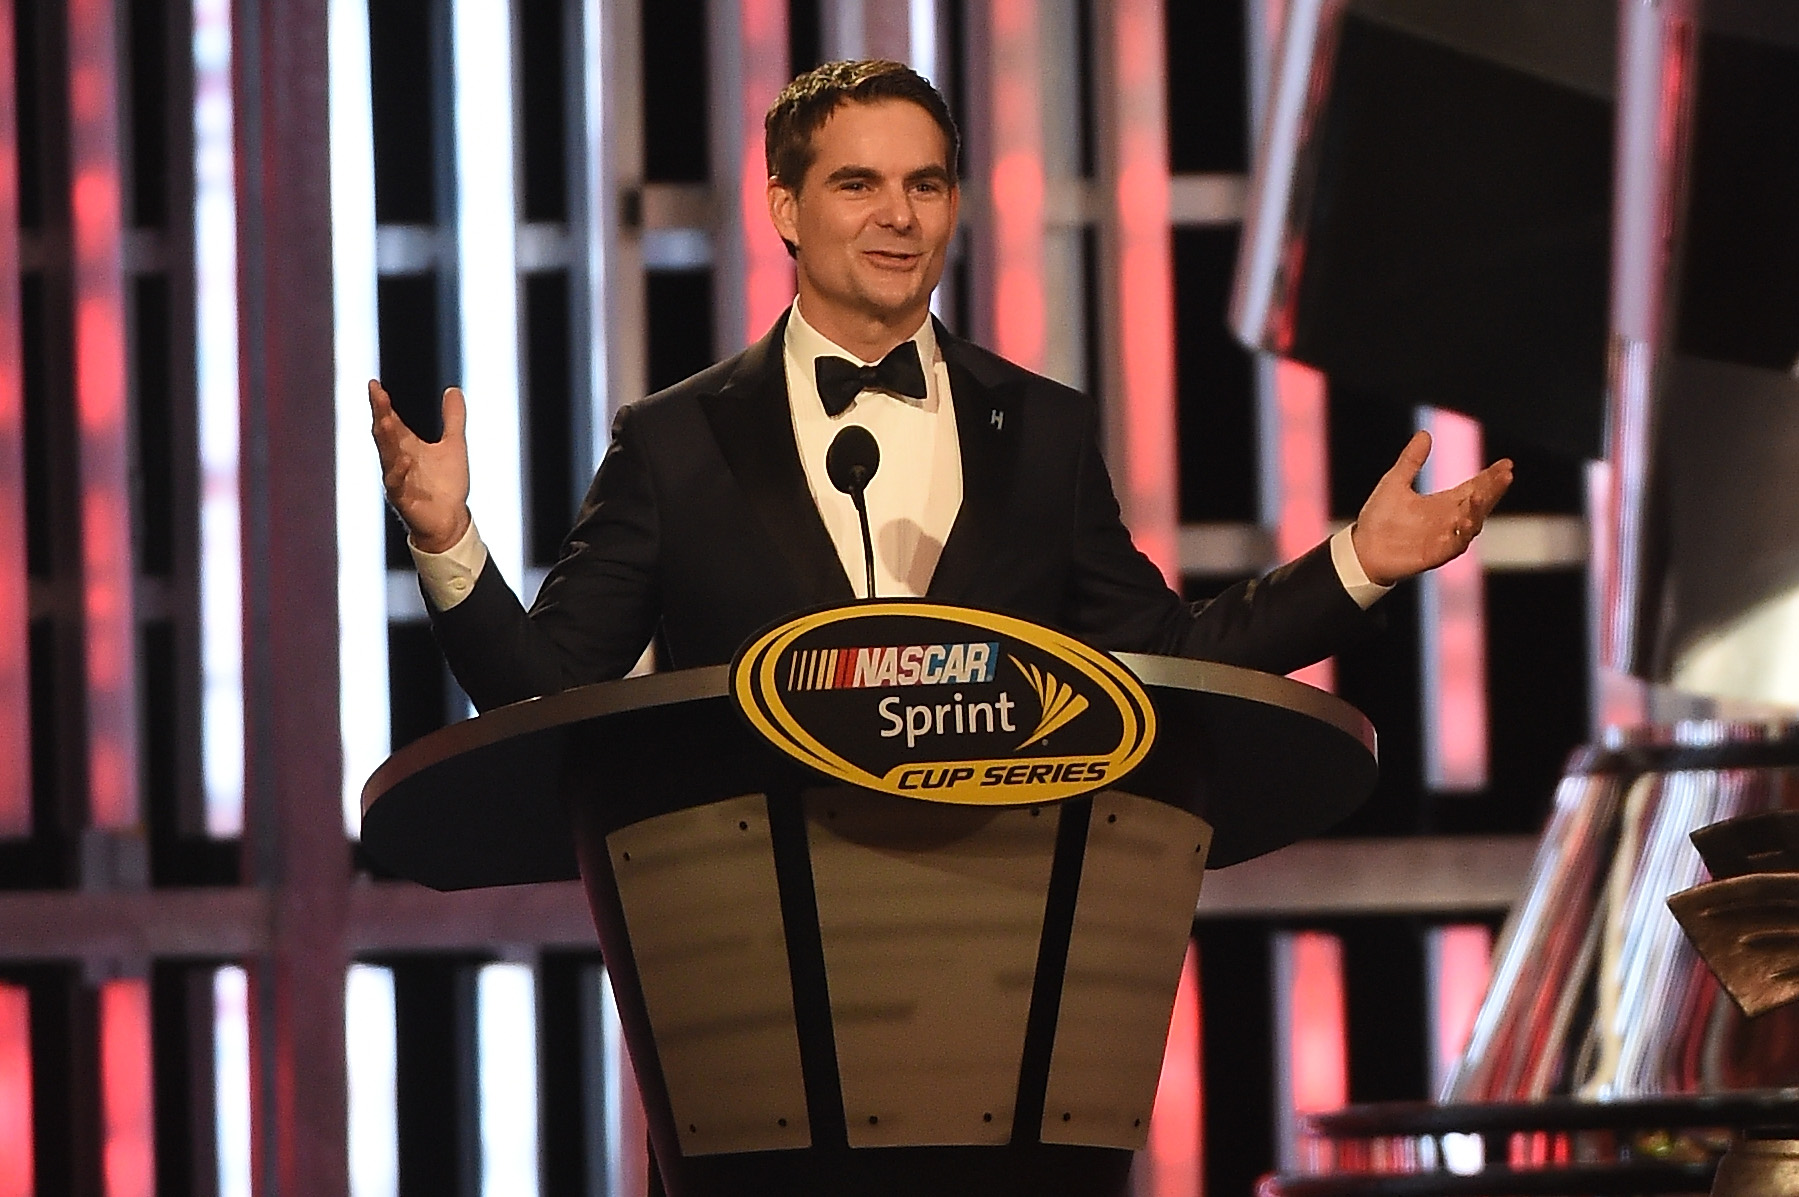 Jeff Gordon is back in the Cup Series (Getty Images).